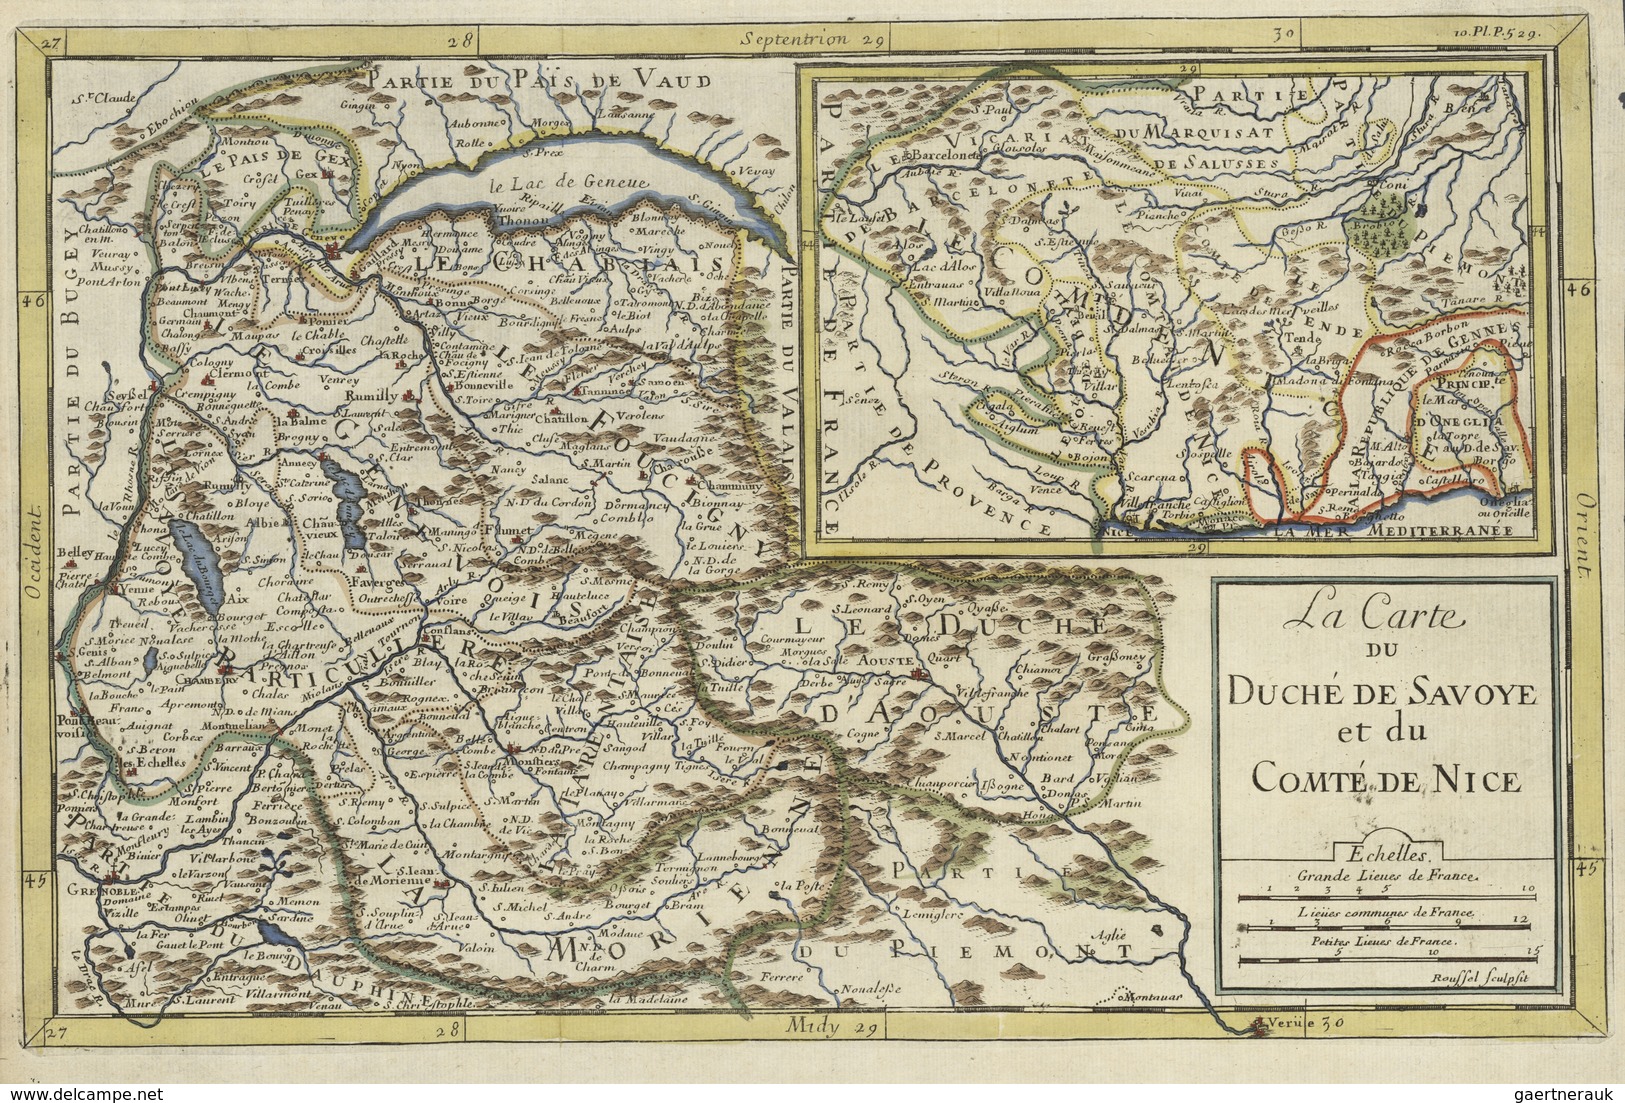 Landkarten Und Stiche: 1689 Map Of Savoy And Nice By Roussel. Nicely Colored On Laid Paper, Very Fin - Géographie